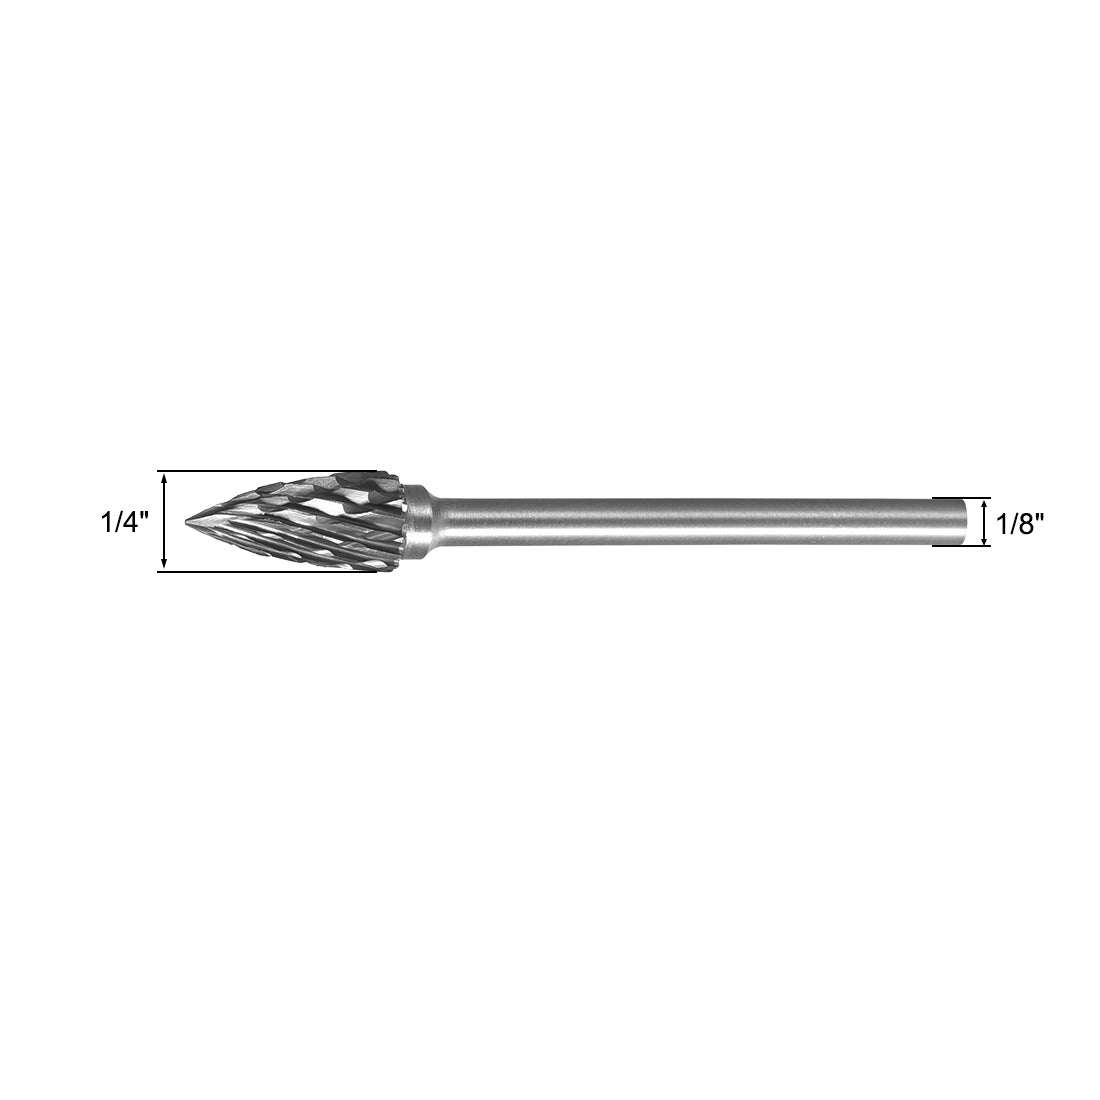 uxcell Uxcell Rotary Files Double Cut Pointed Tree G Type 1/8" Shank 1/4" Head Size 3pcs